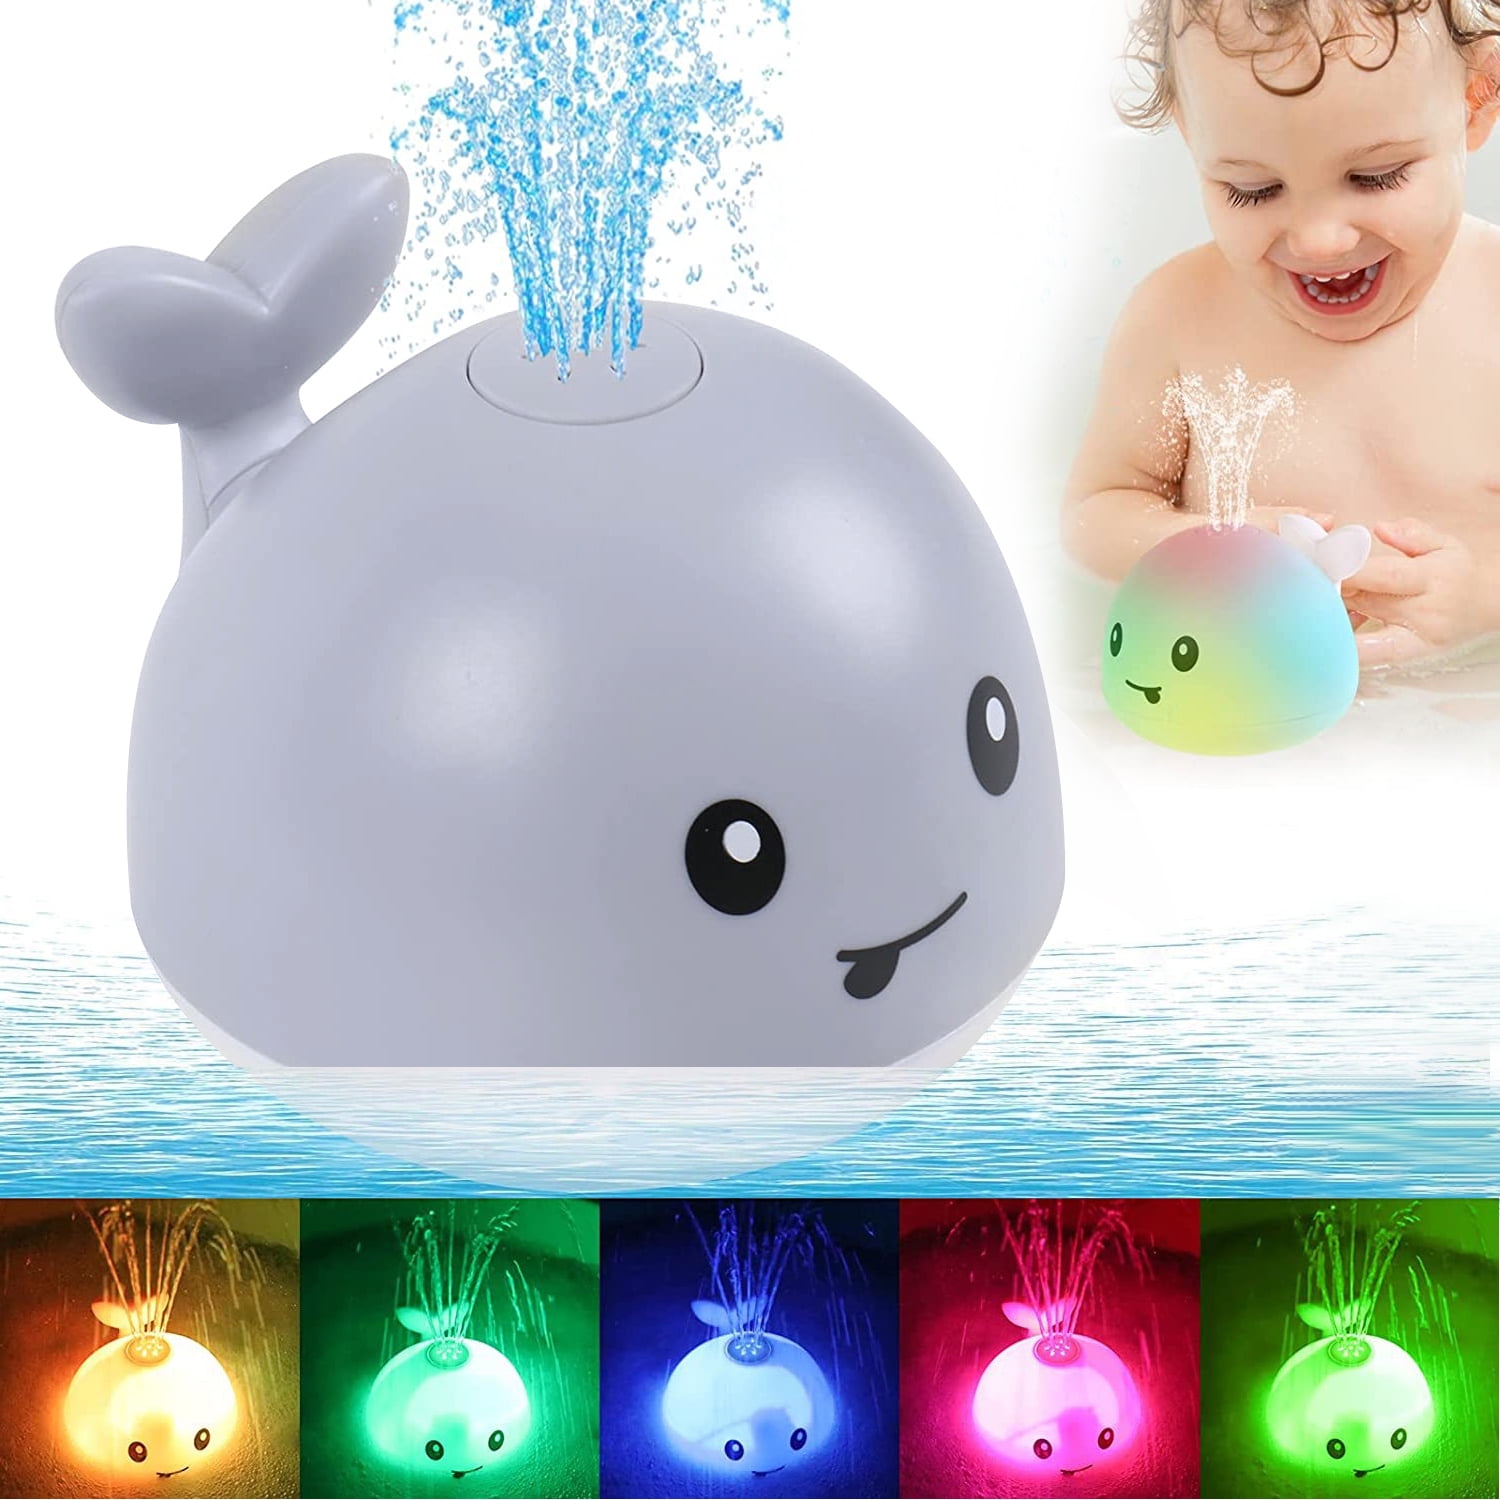 ToyTexx Floating Bath Toys Baby Whale Kids Baby Infant Toddlers Learn Play Fun 